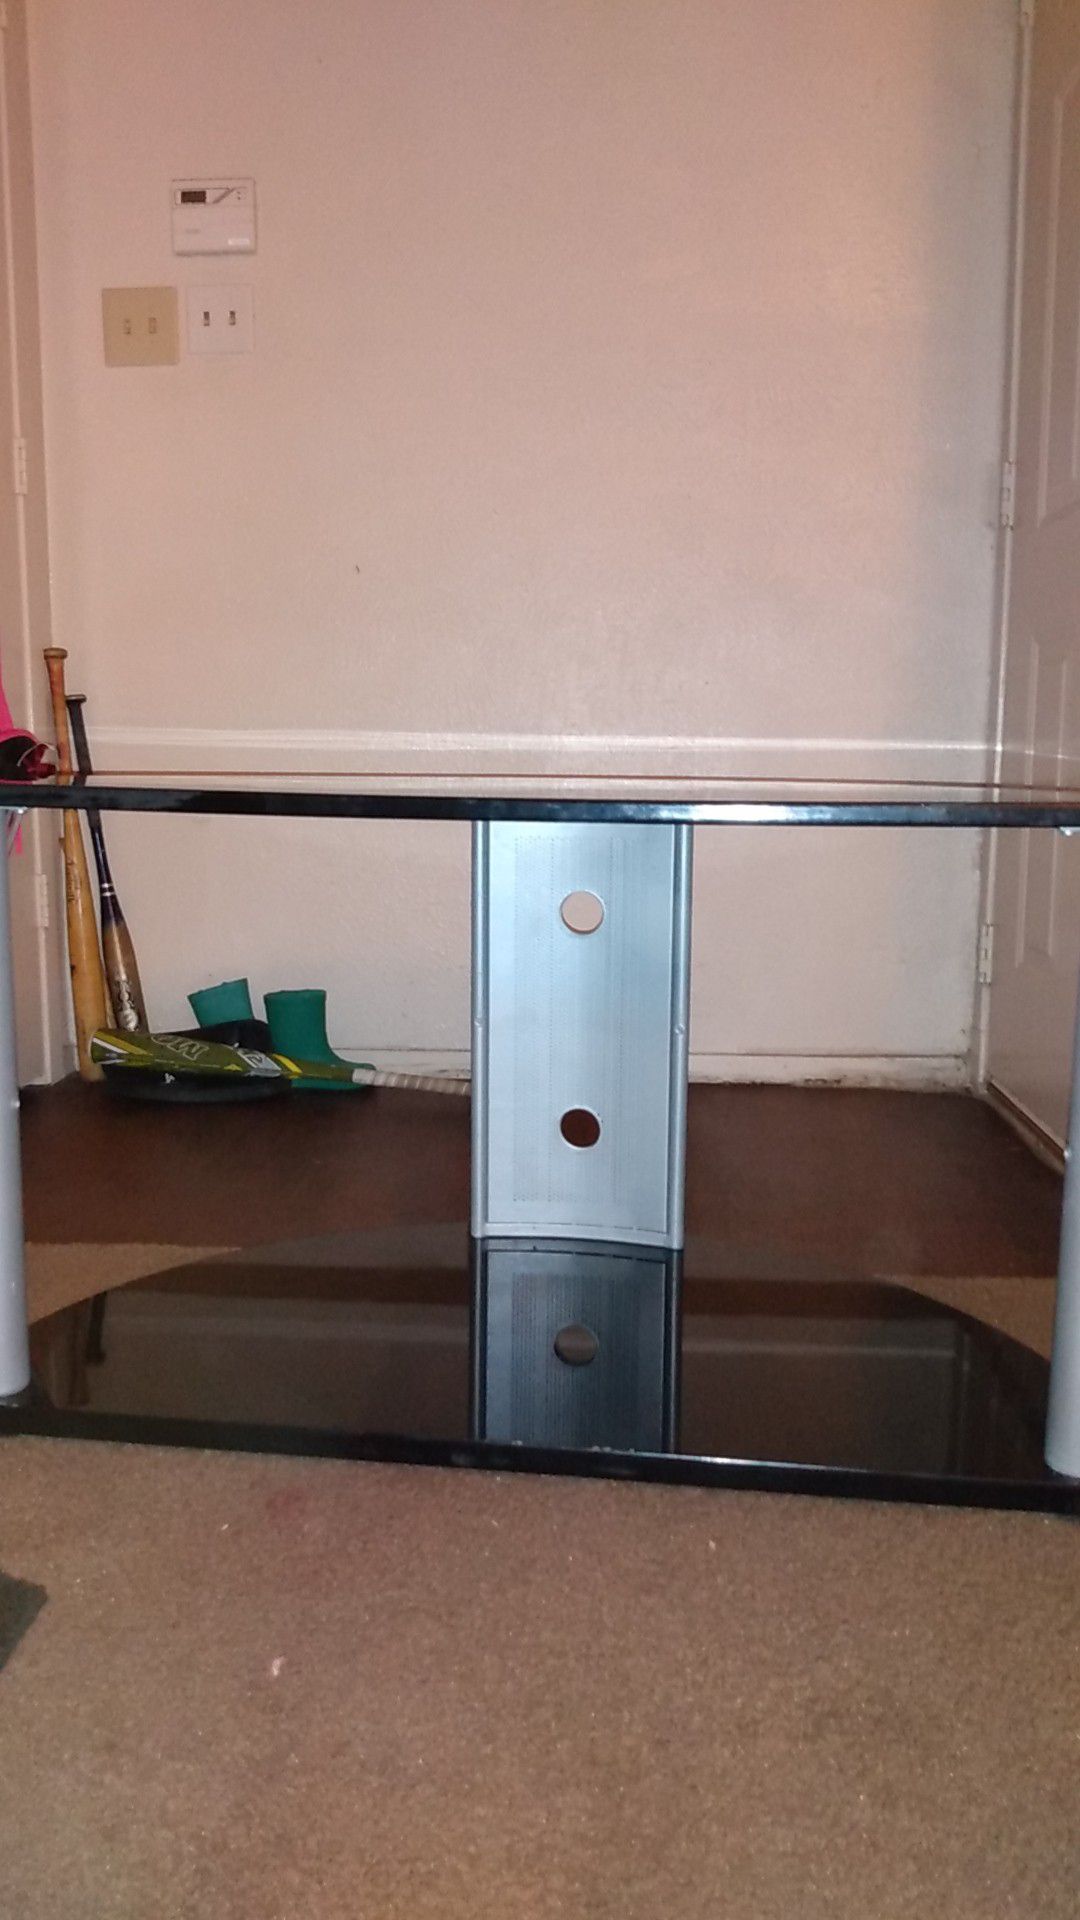 Black tv stand holds up to 50" Excellent condition Asking $20